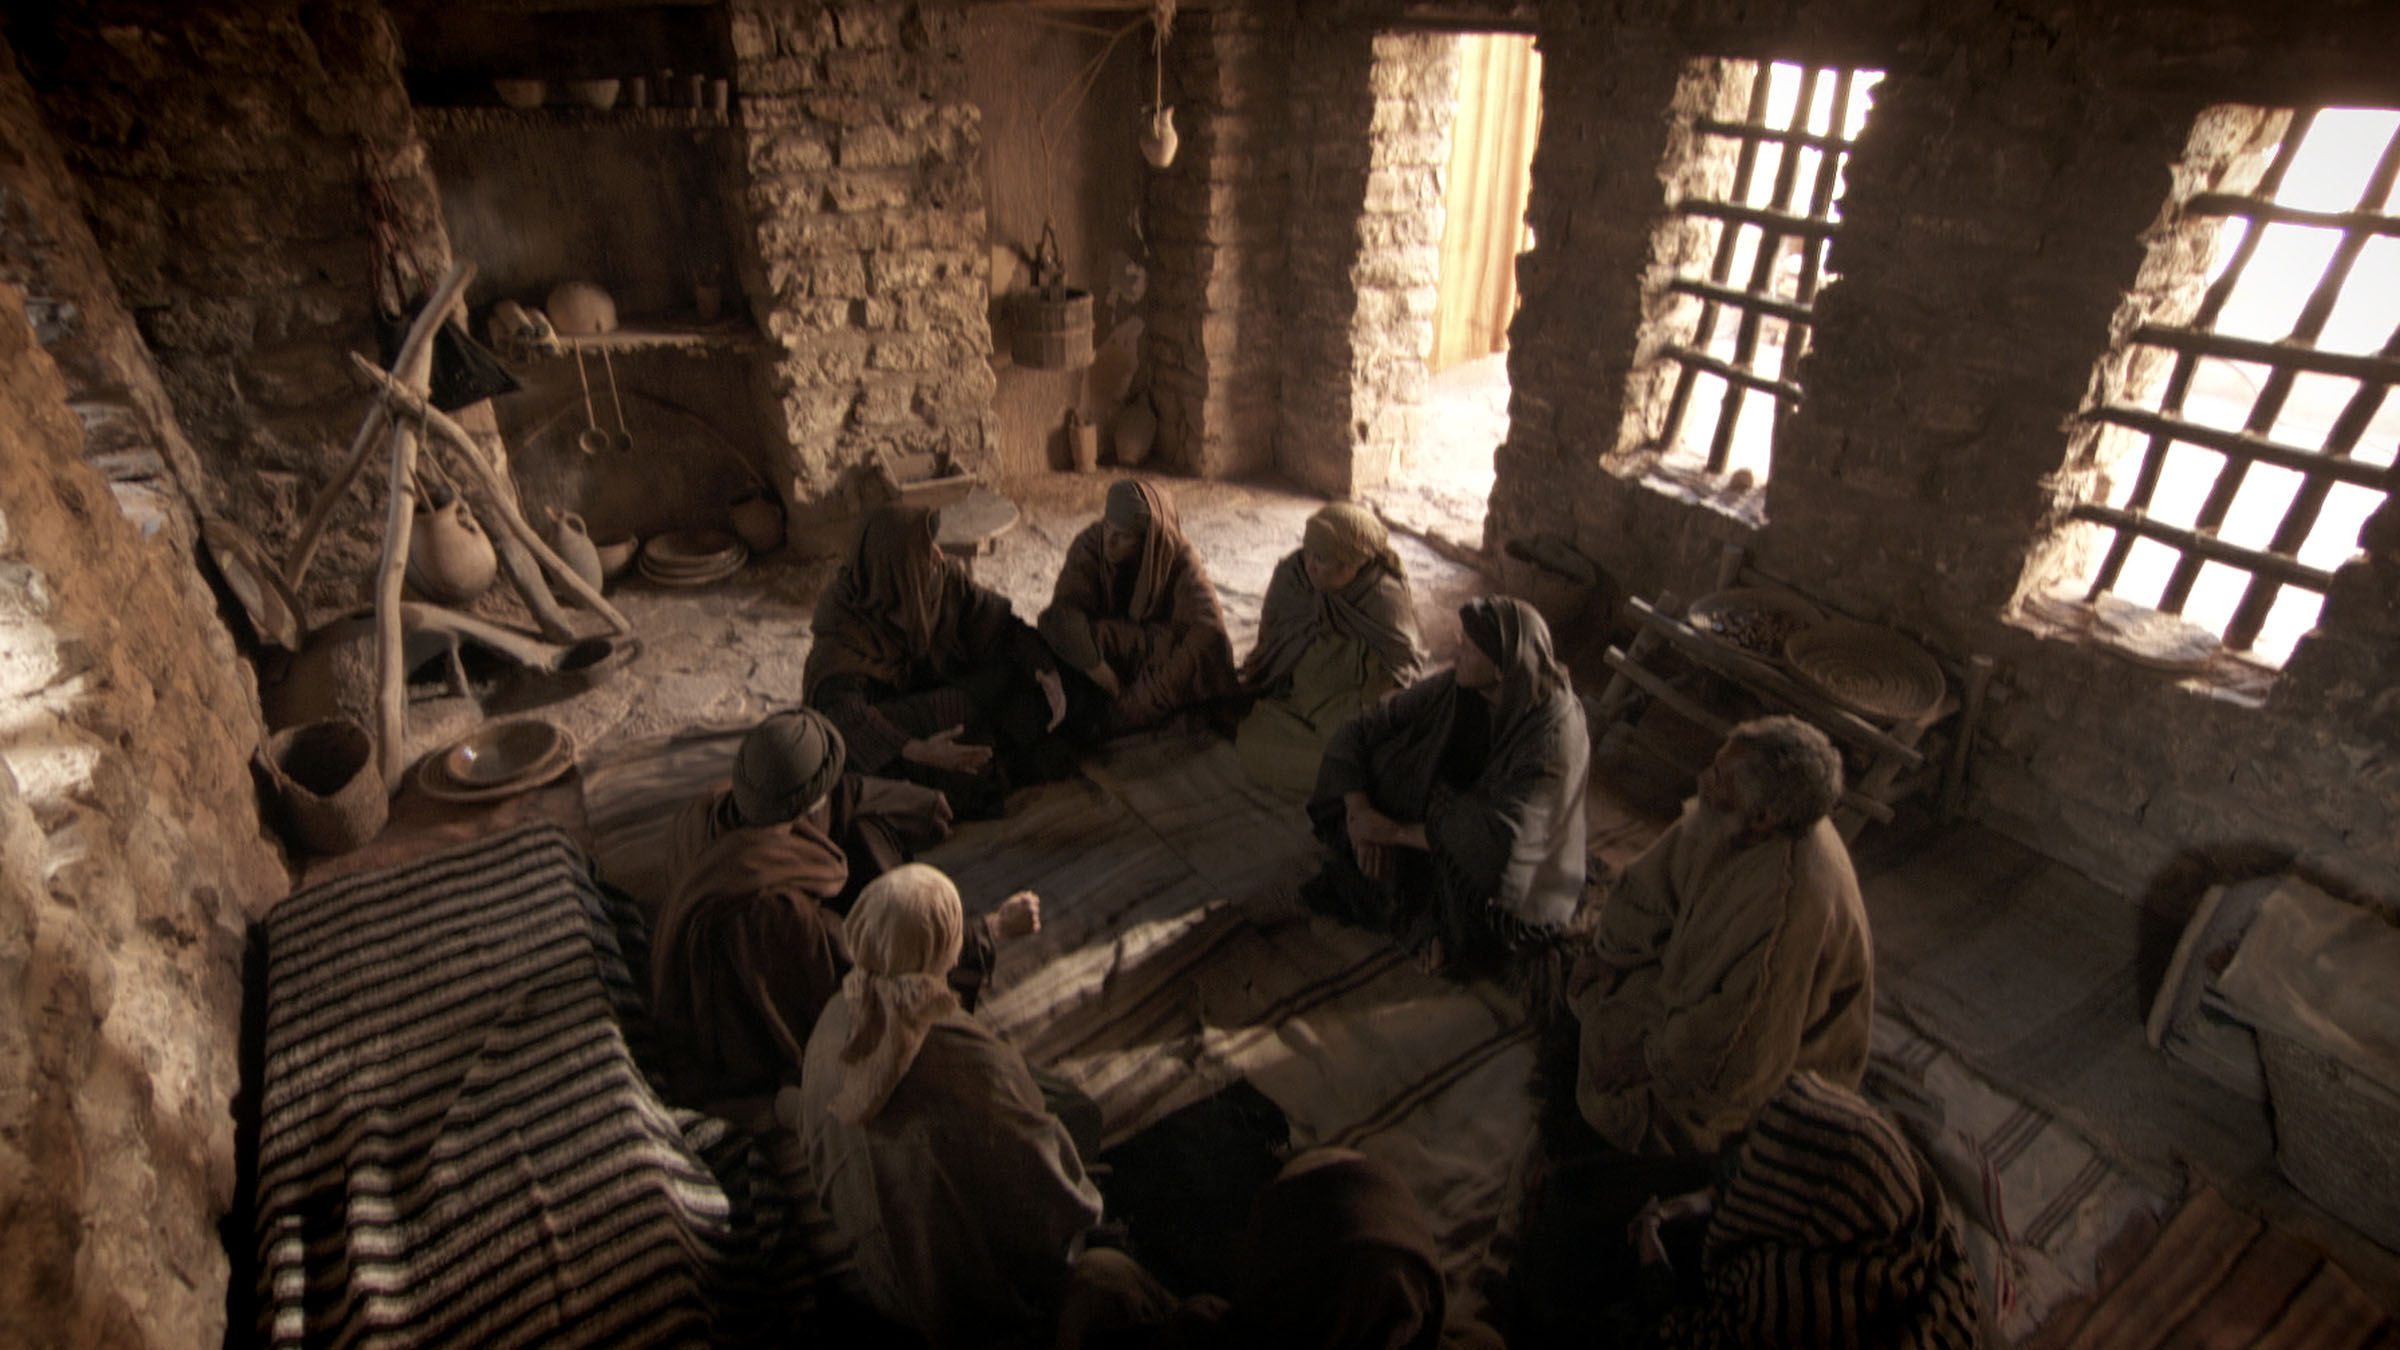 Jesus: Rise To Power: Birth of Christianity - National Geographic for